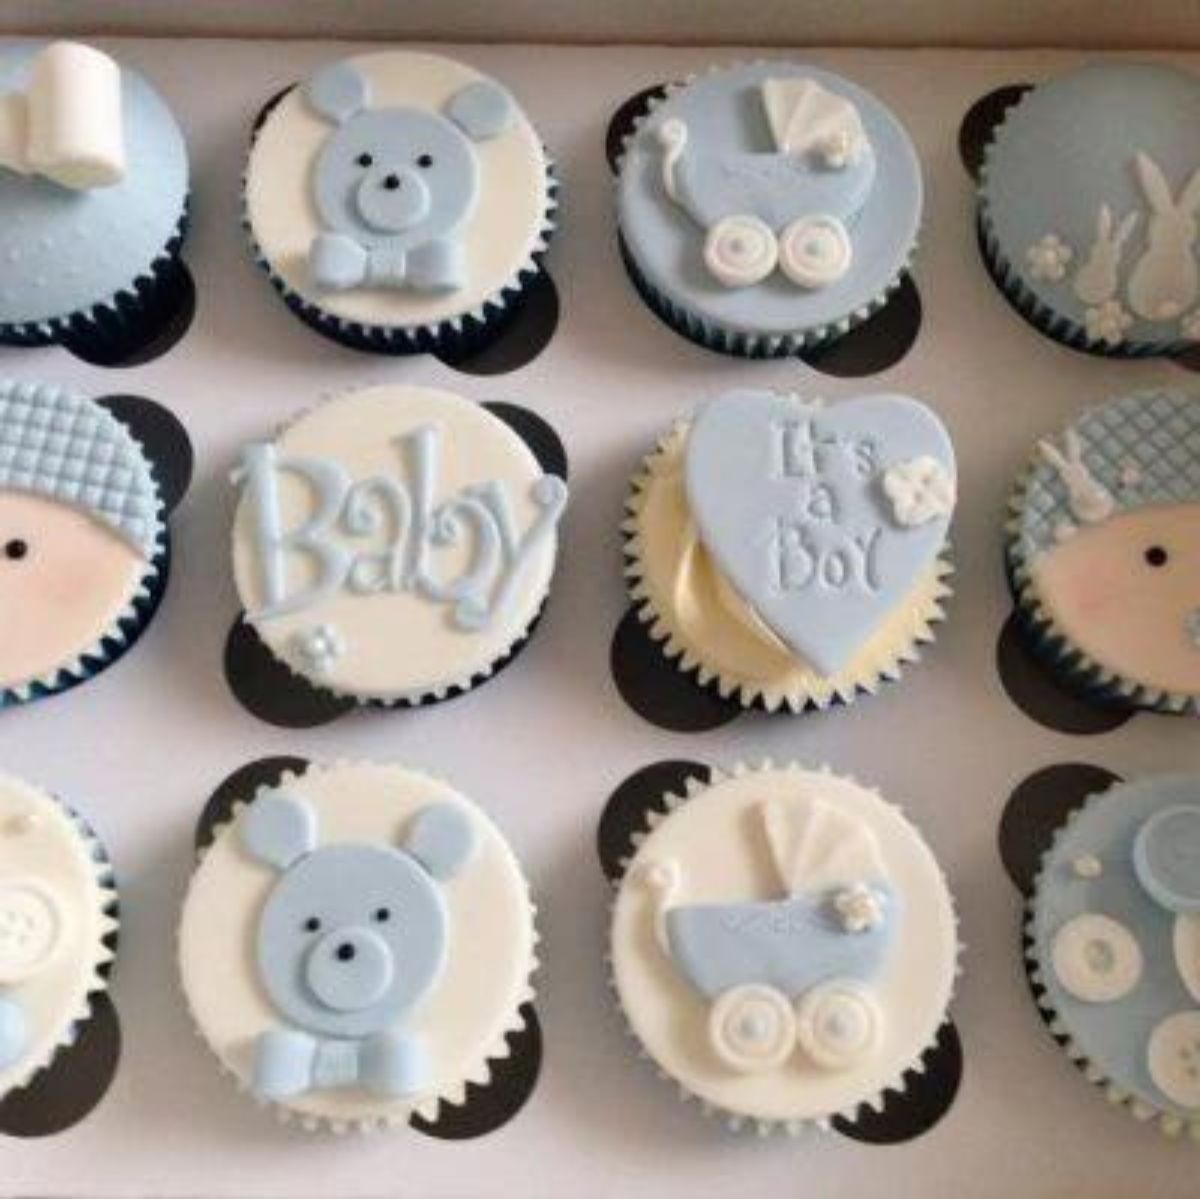 It's a Boy Baby Shower Cupcakes